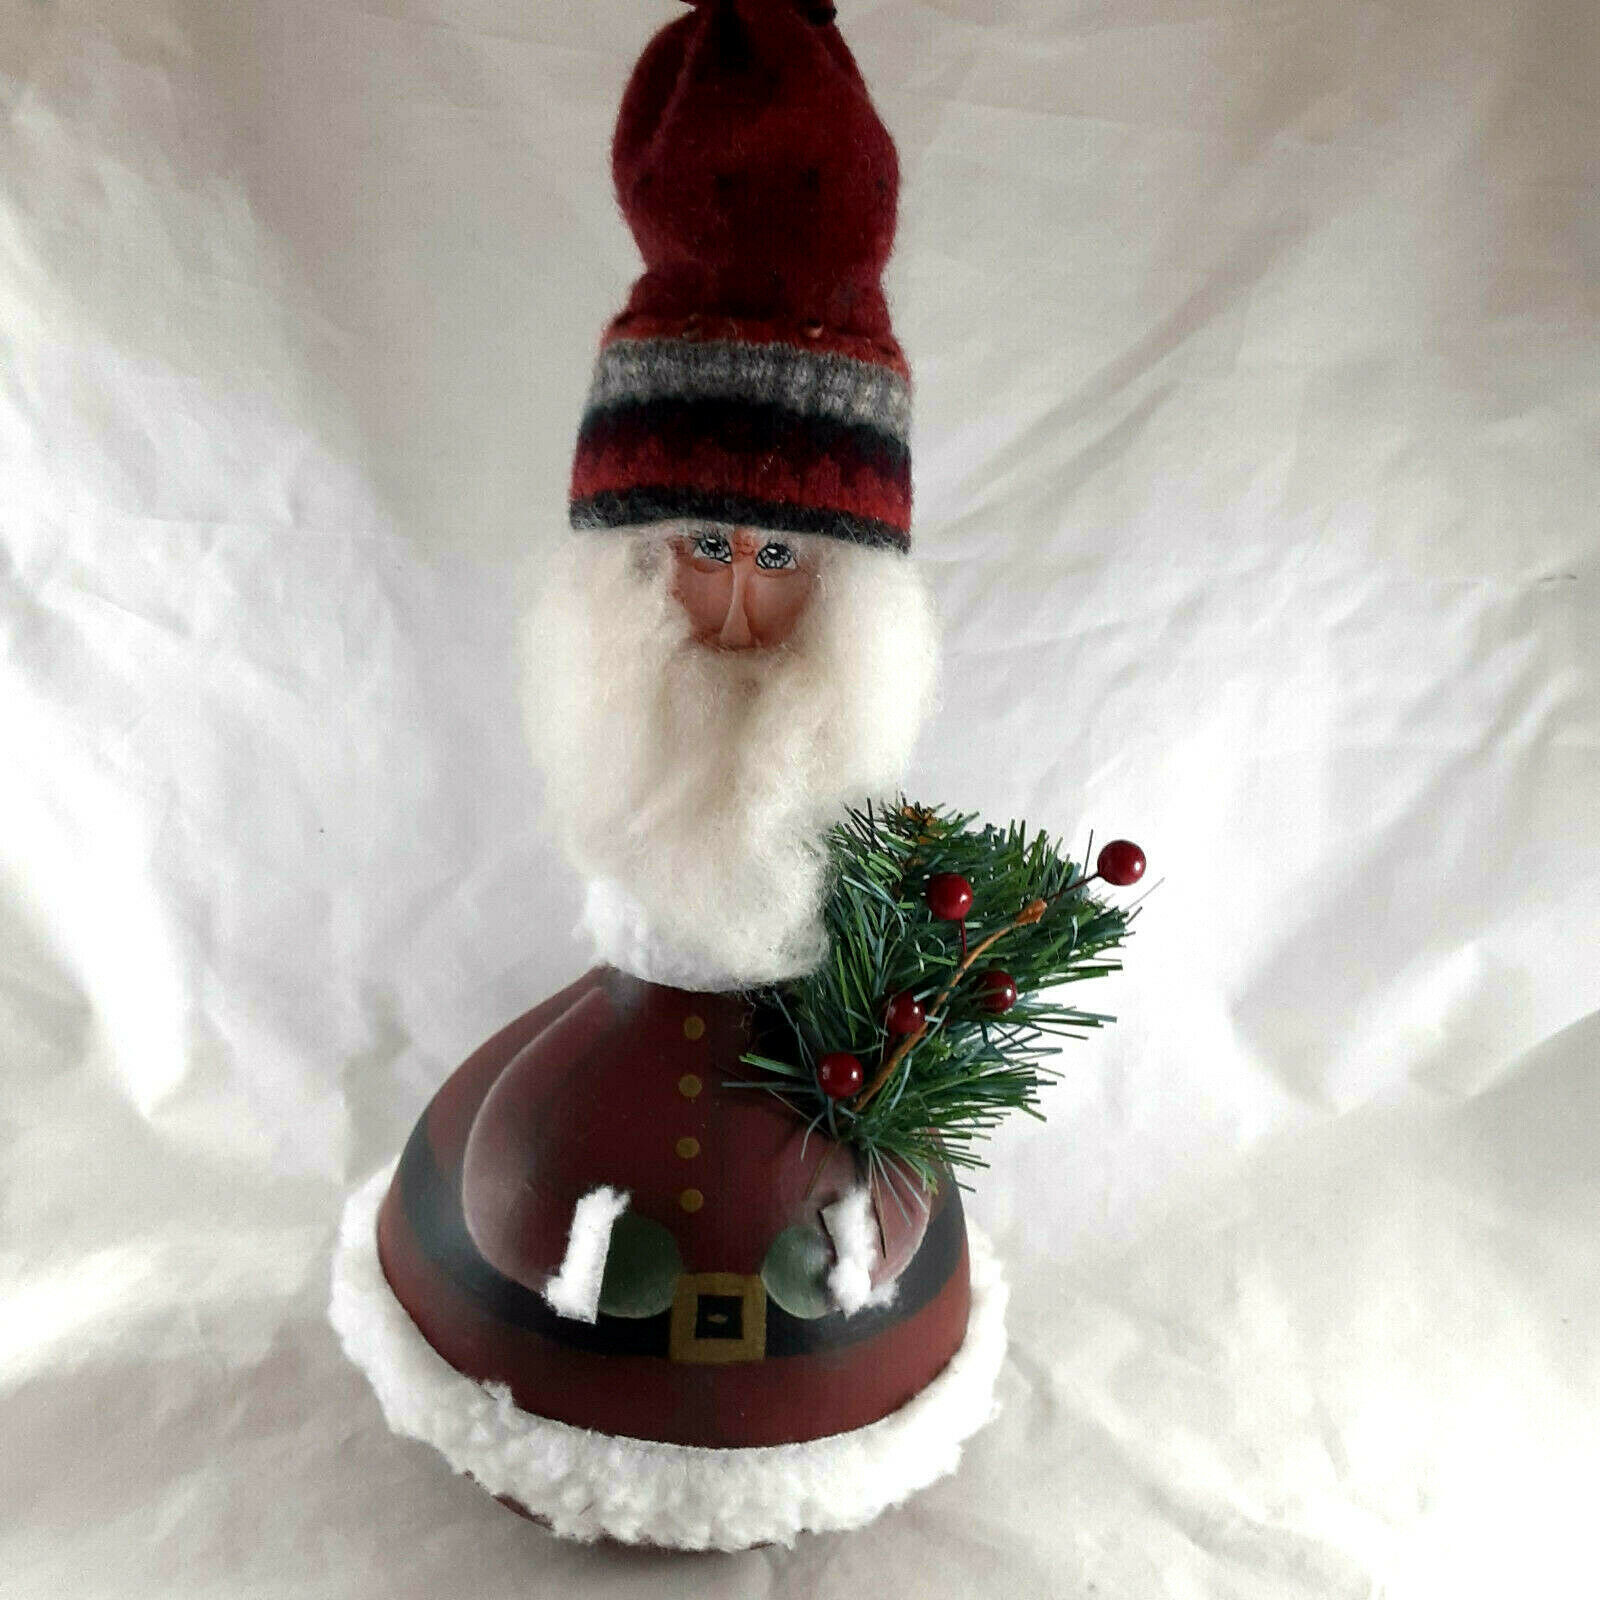 Christmas Gourd Santa Claus Figure Hand Painted Folk Art 2010 sigmed 15.5 inches - $19.79